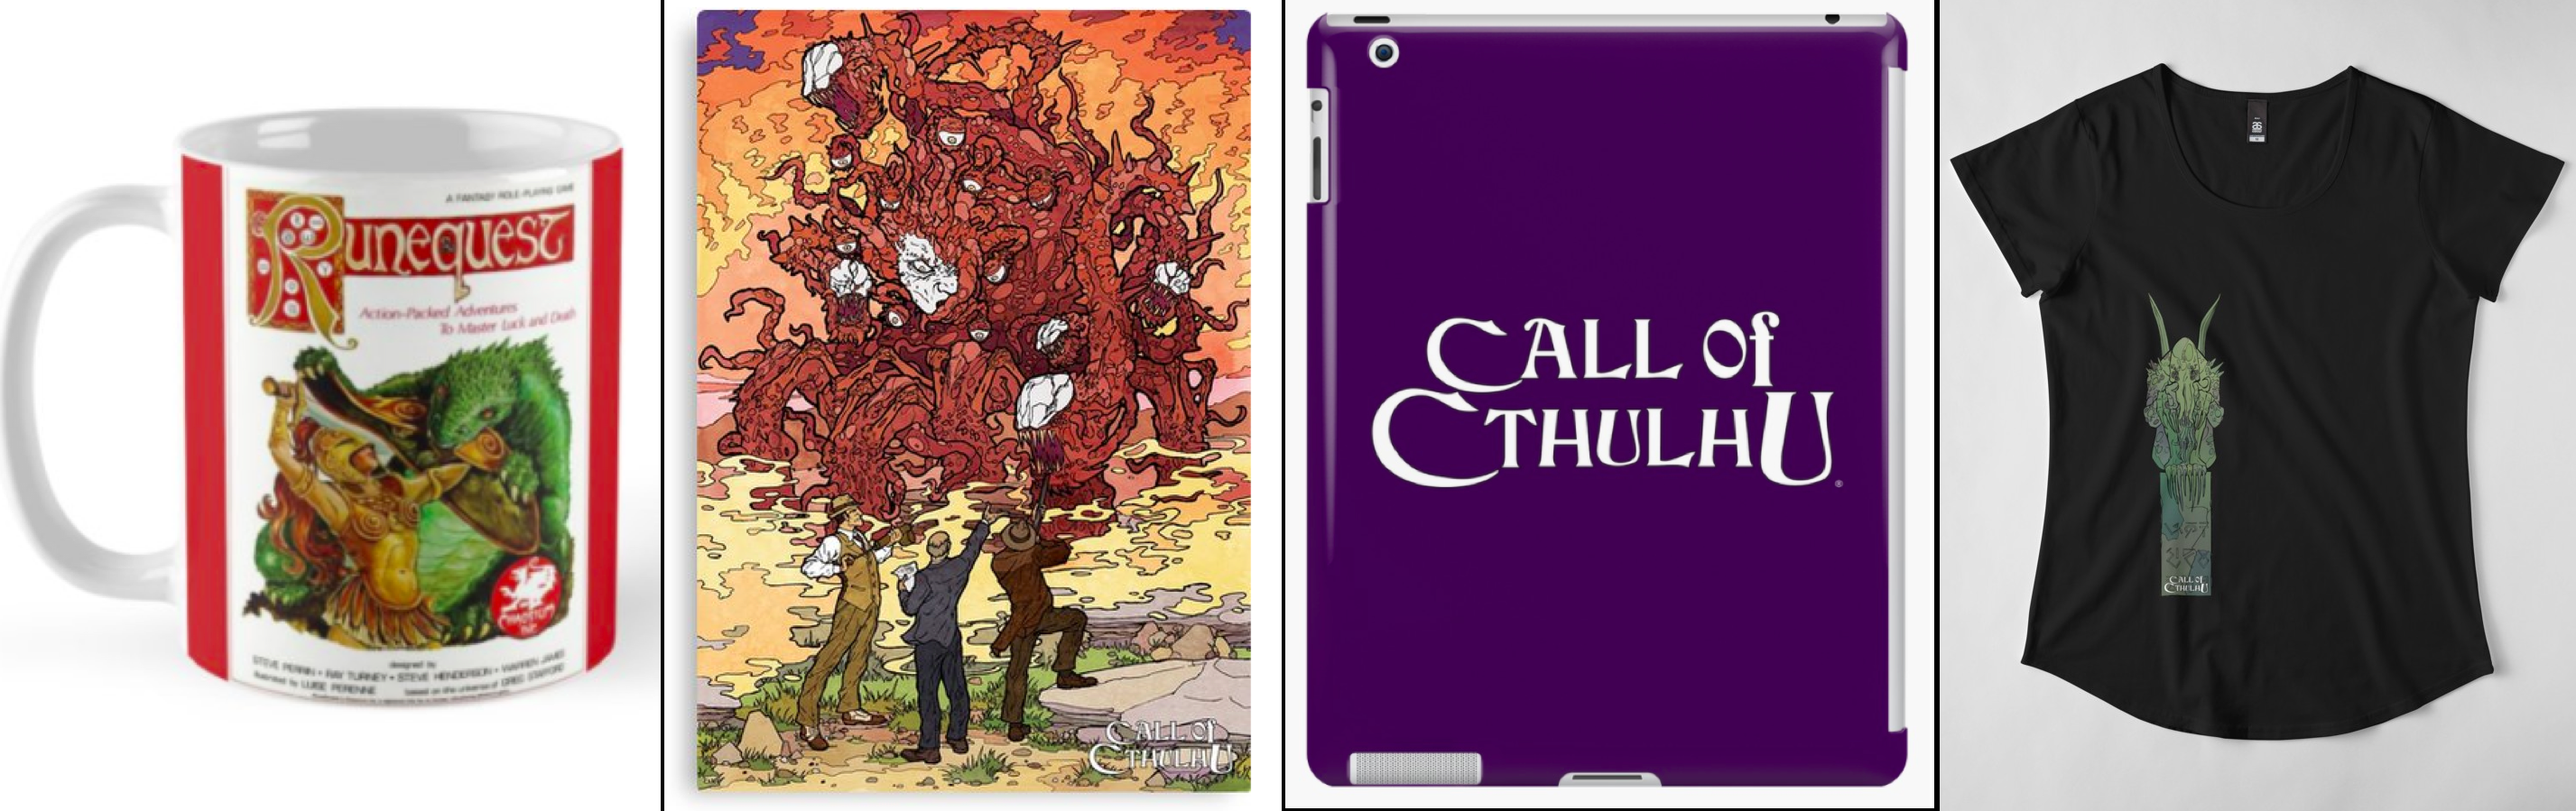 25% off Chaosium Redbubble Today